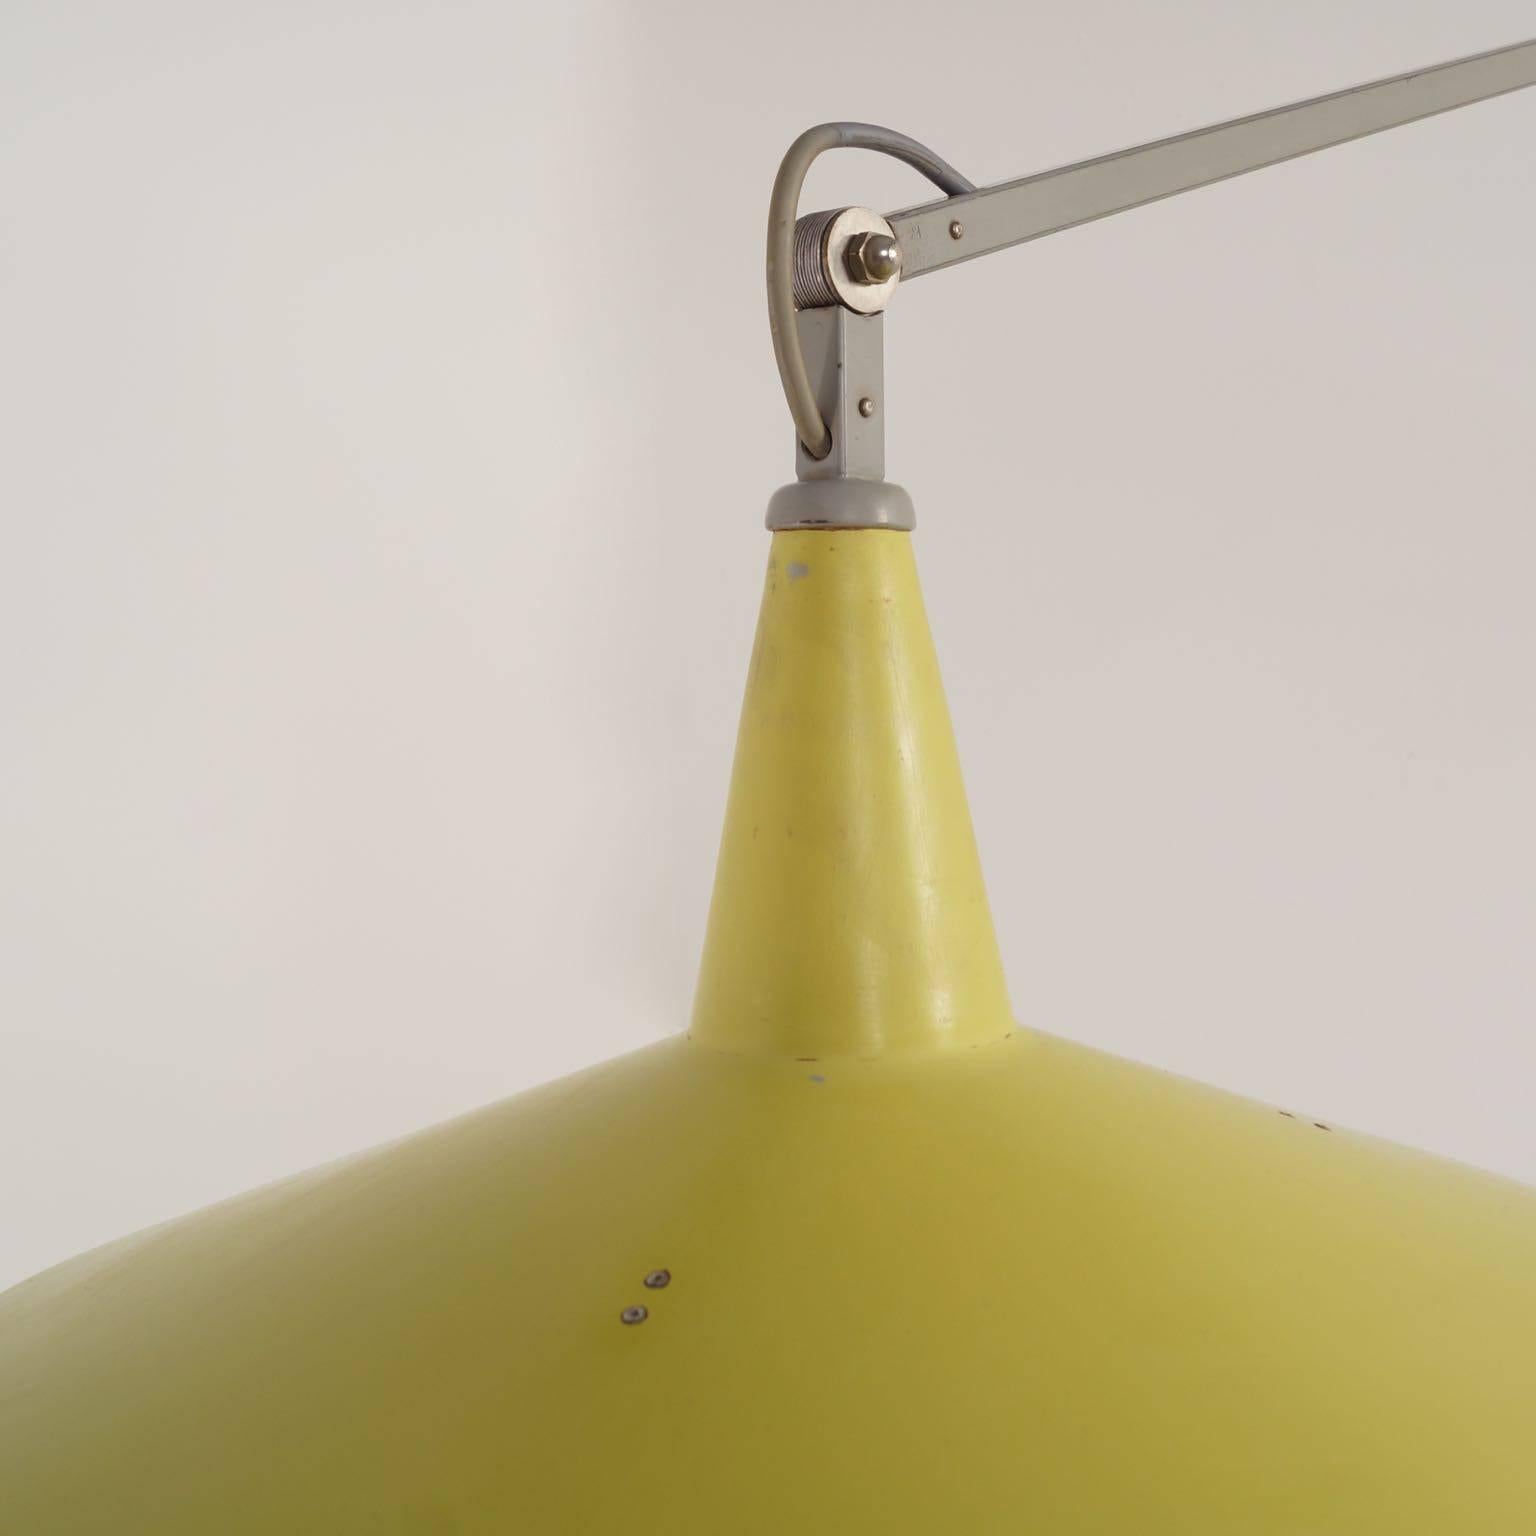 Aluminum Rare Yellow Panama Wall Lamp No. 4050 by W. Rietveld for Gispen, 1956 For Sale